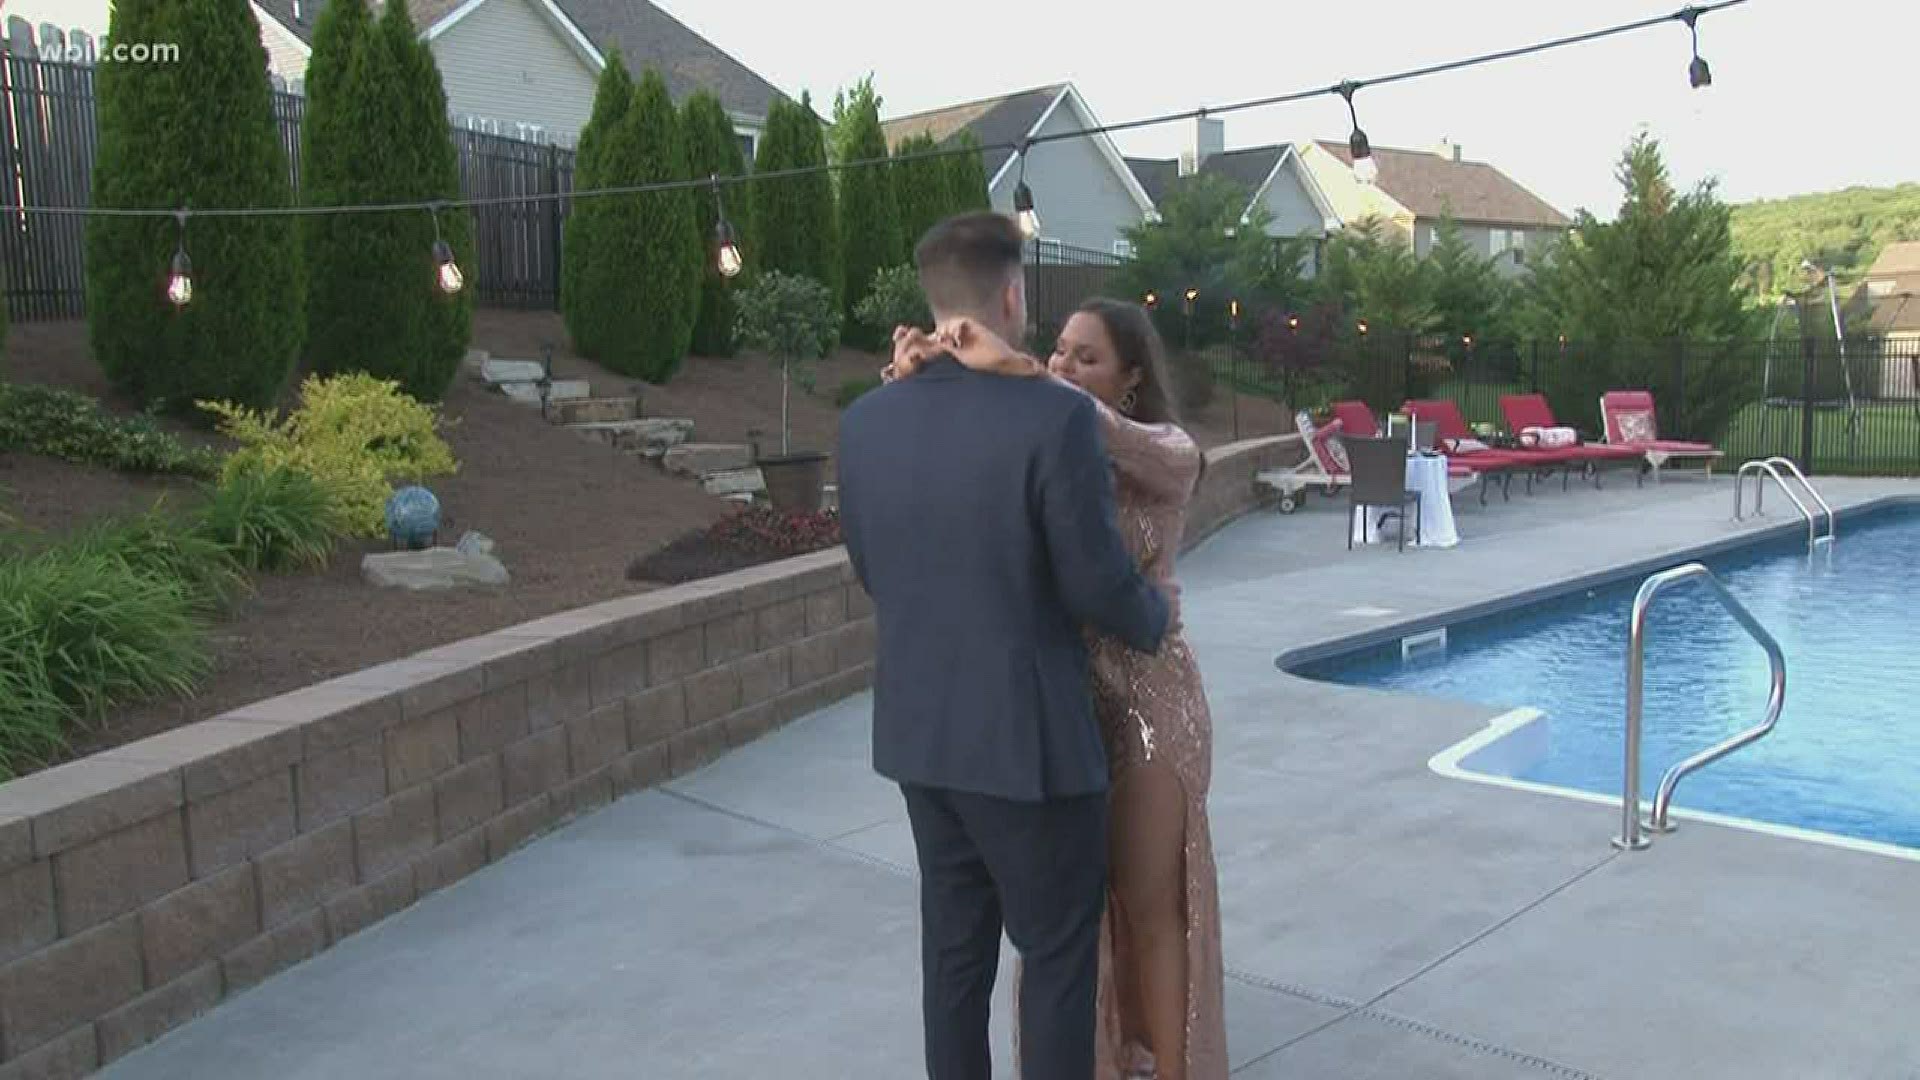 A family in North Knoxville hosted an at-home private prom for two soon-to-be graduated seniors.